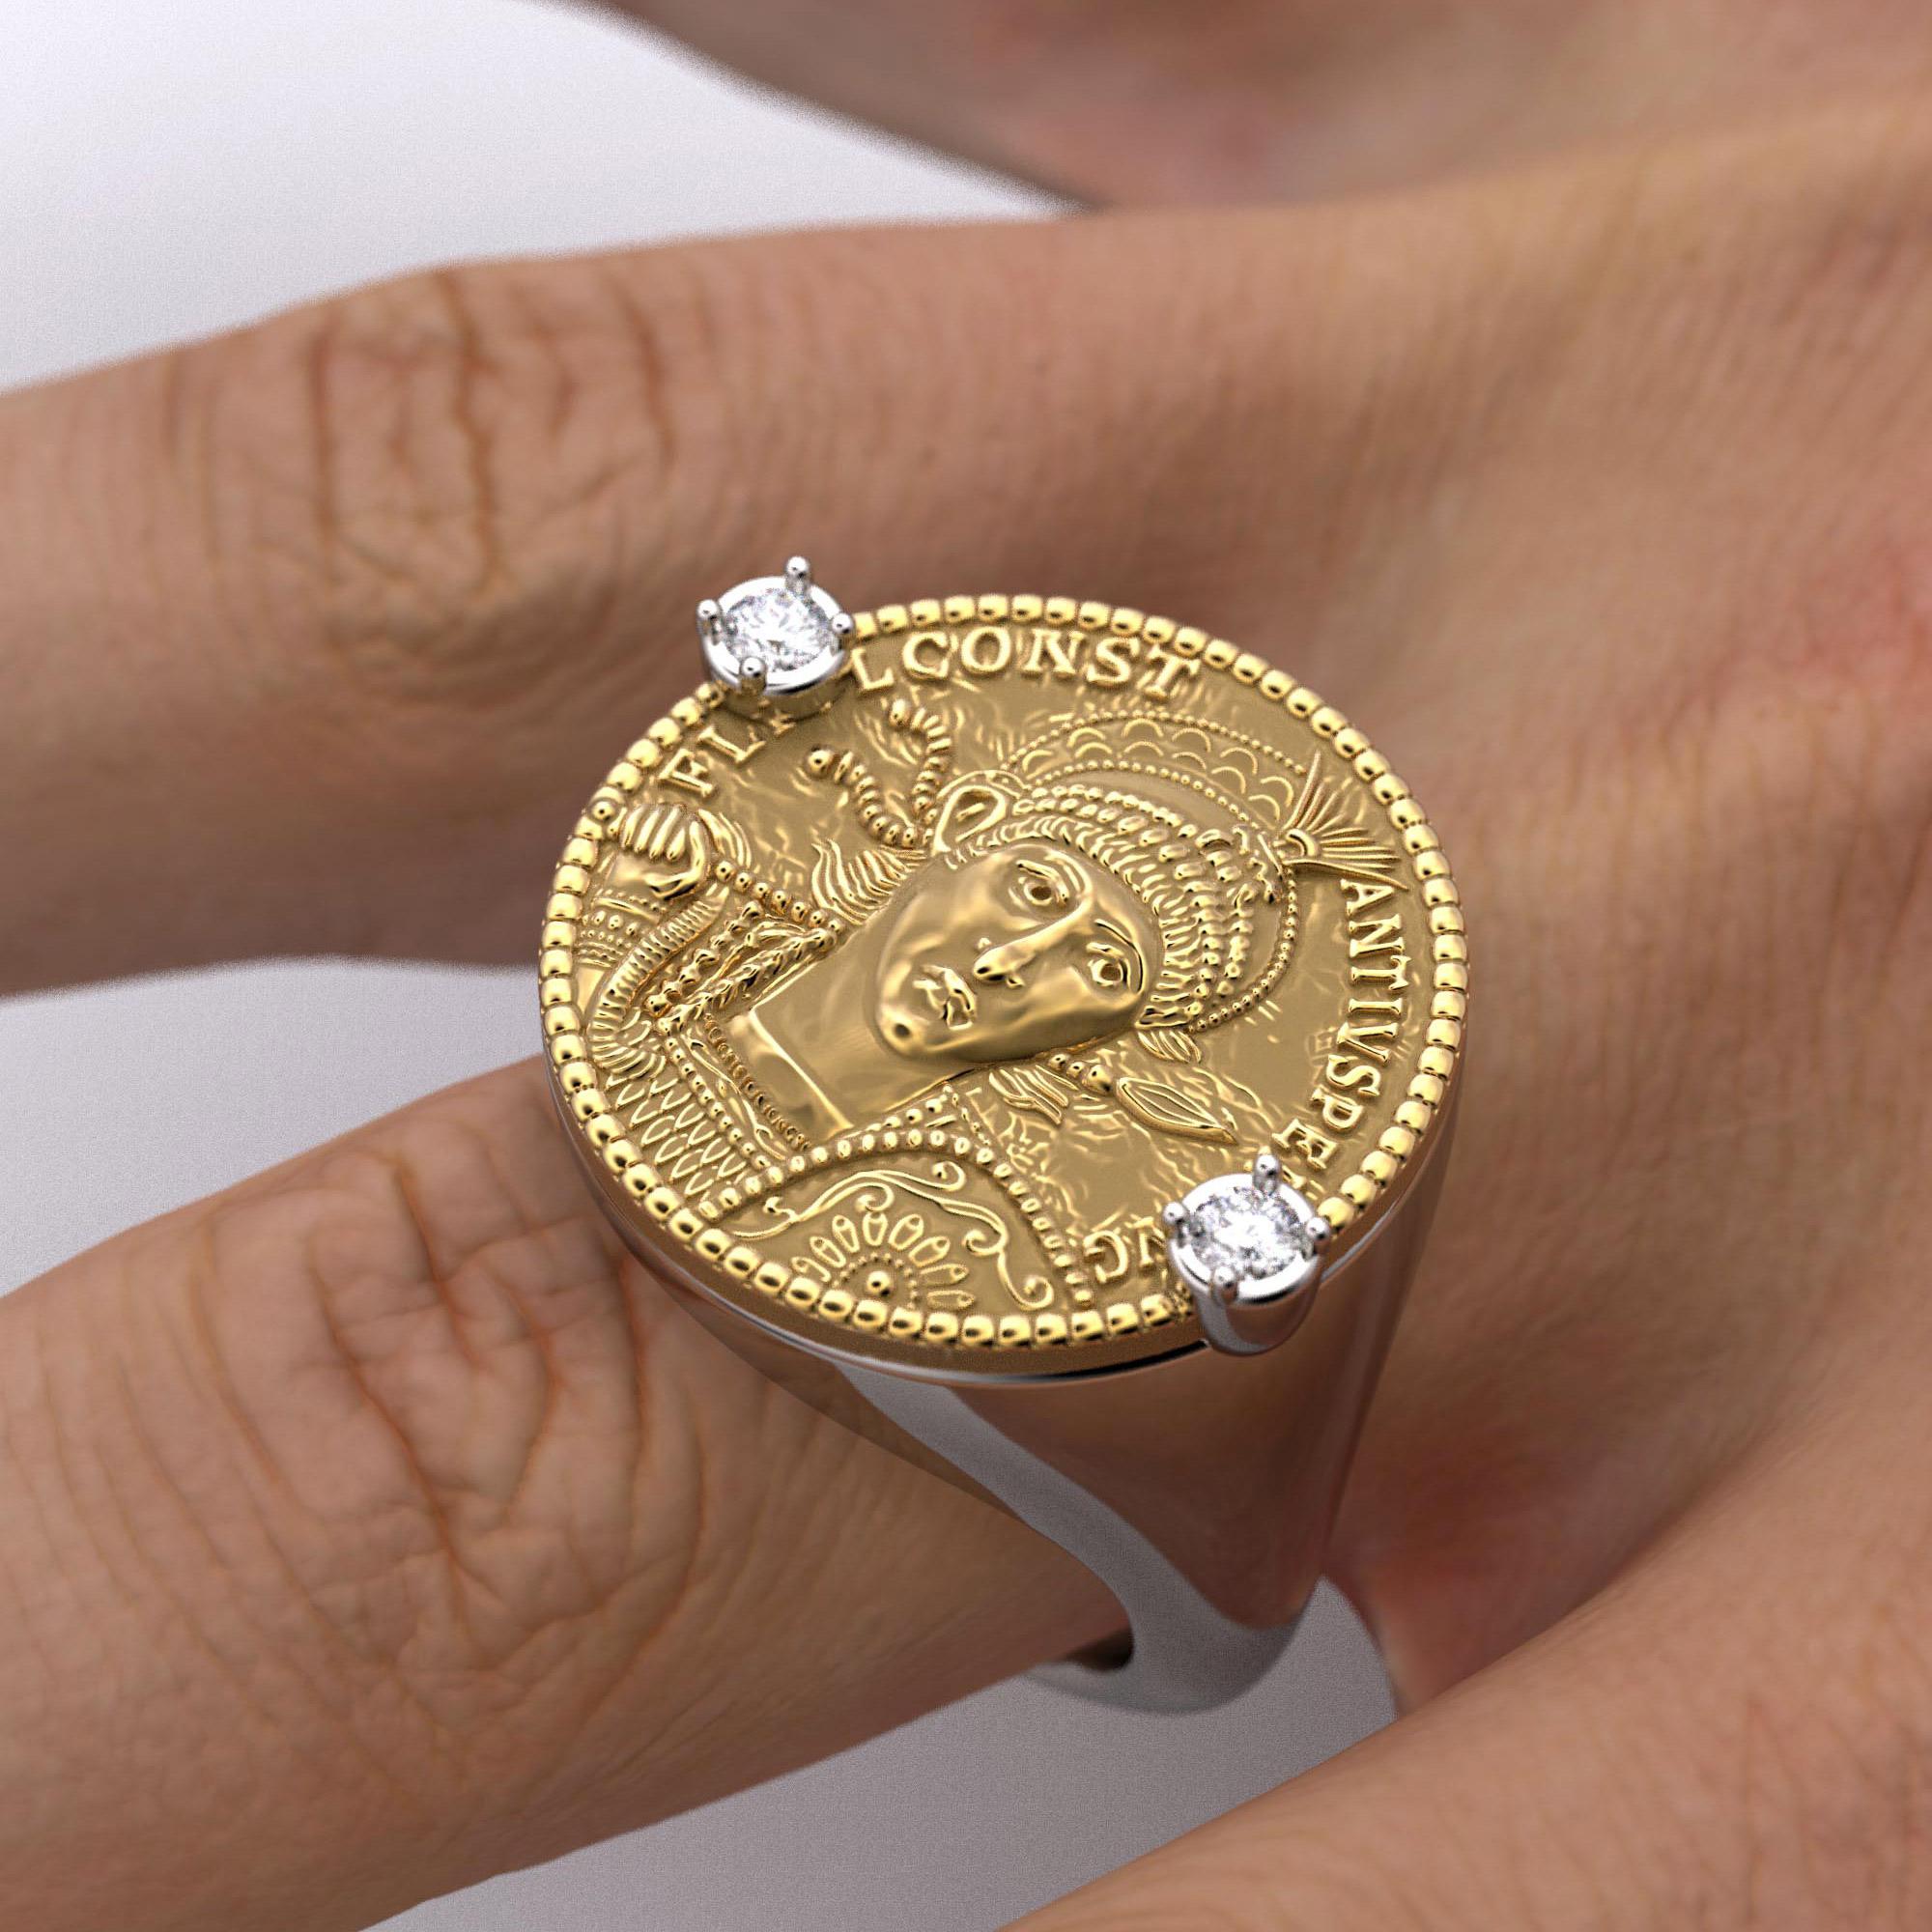 NEW DESIGN! Men's 10k Gold Coin Ring featuring a 1/10th ounce USA Walk –  Gem of the Day